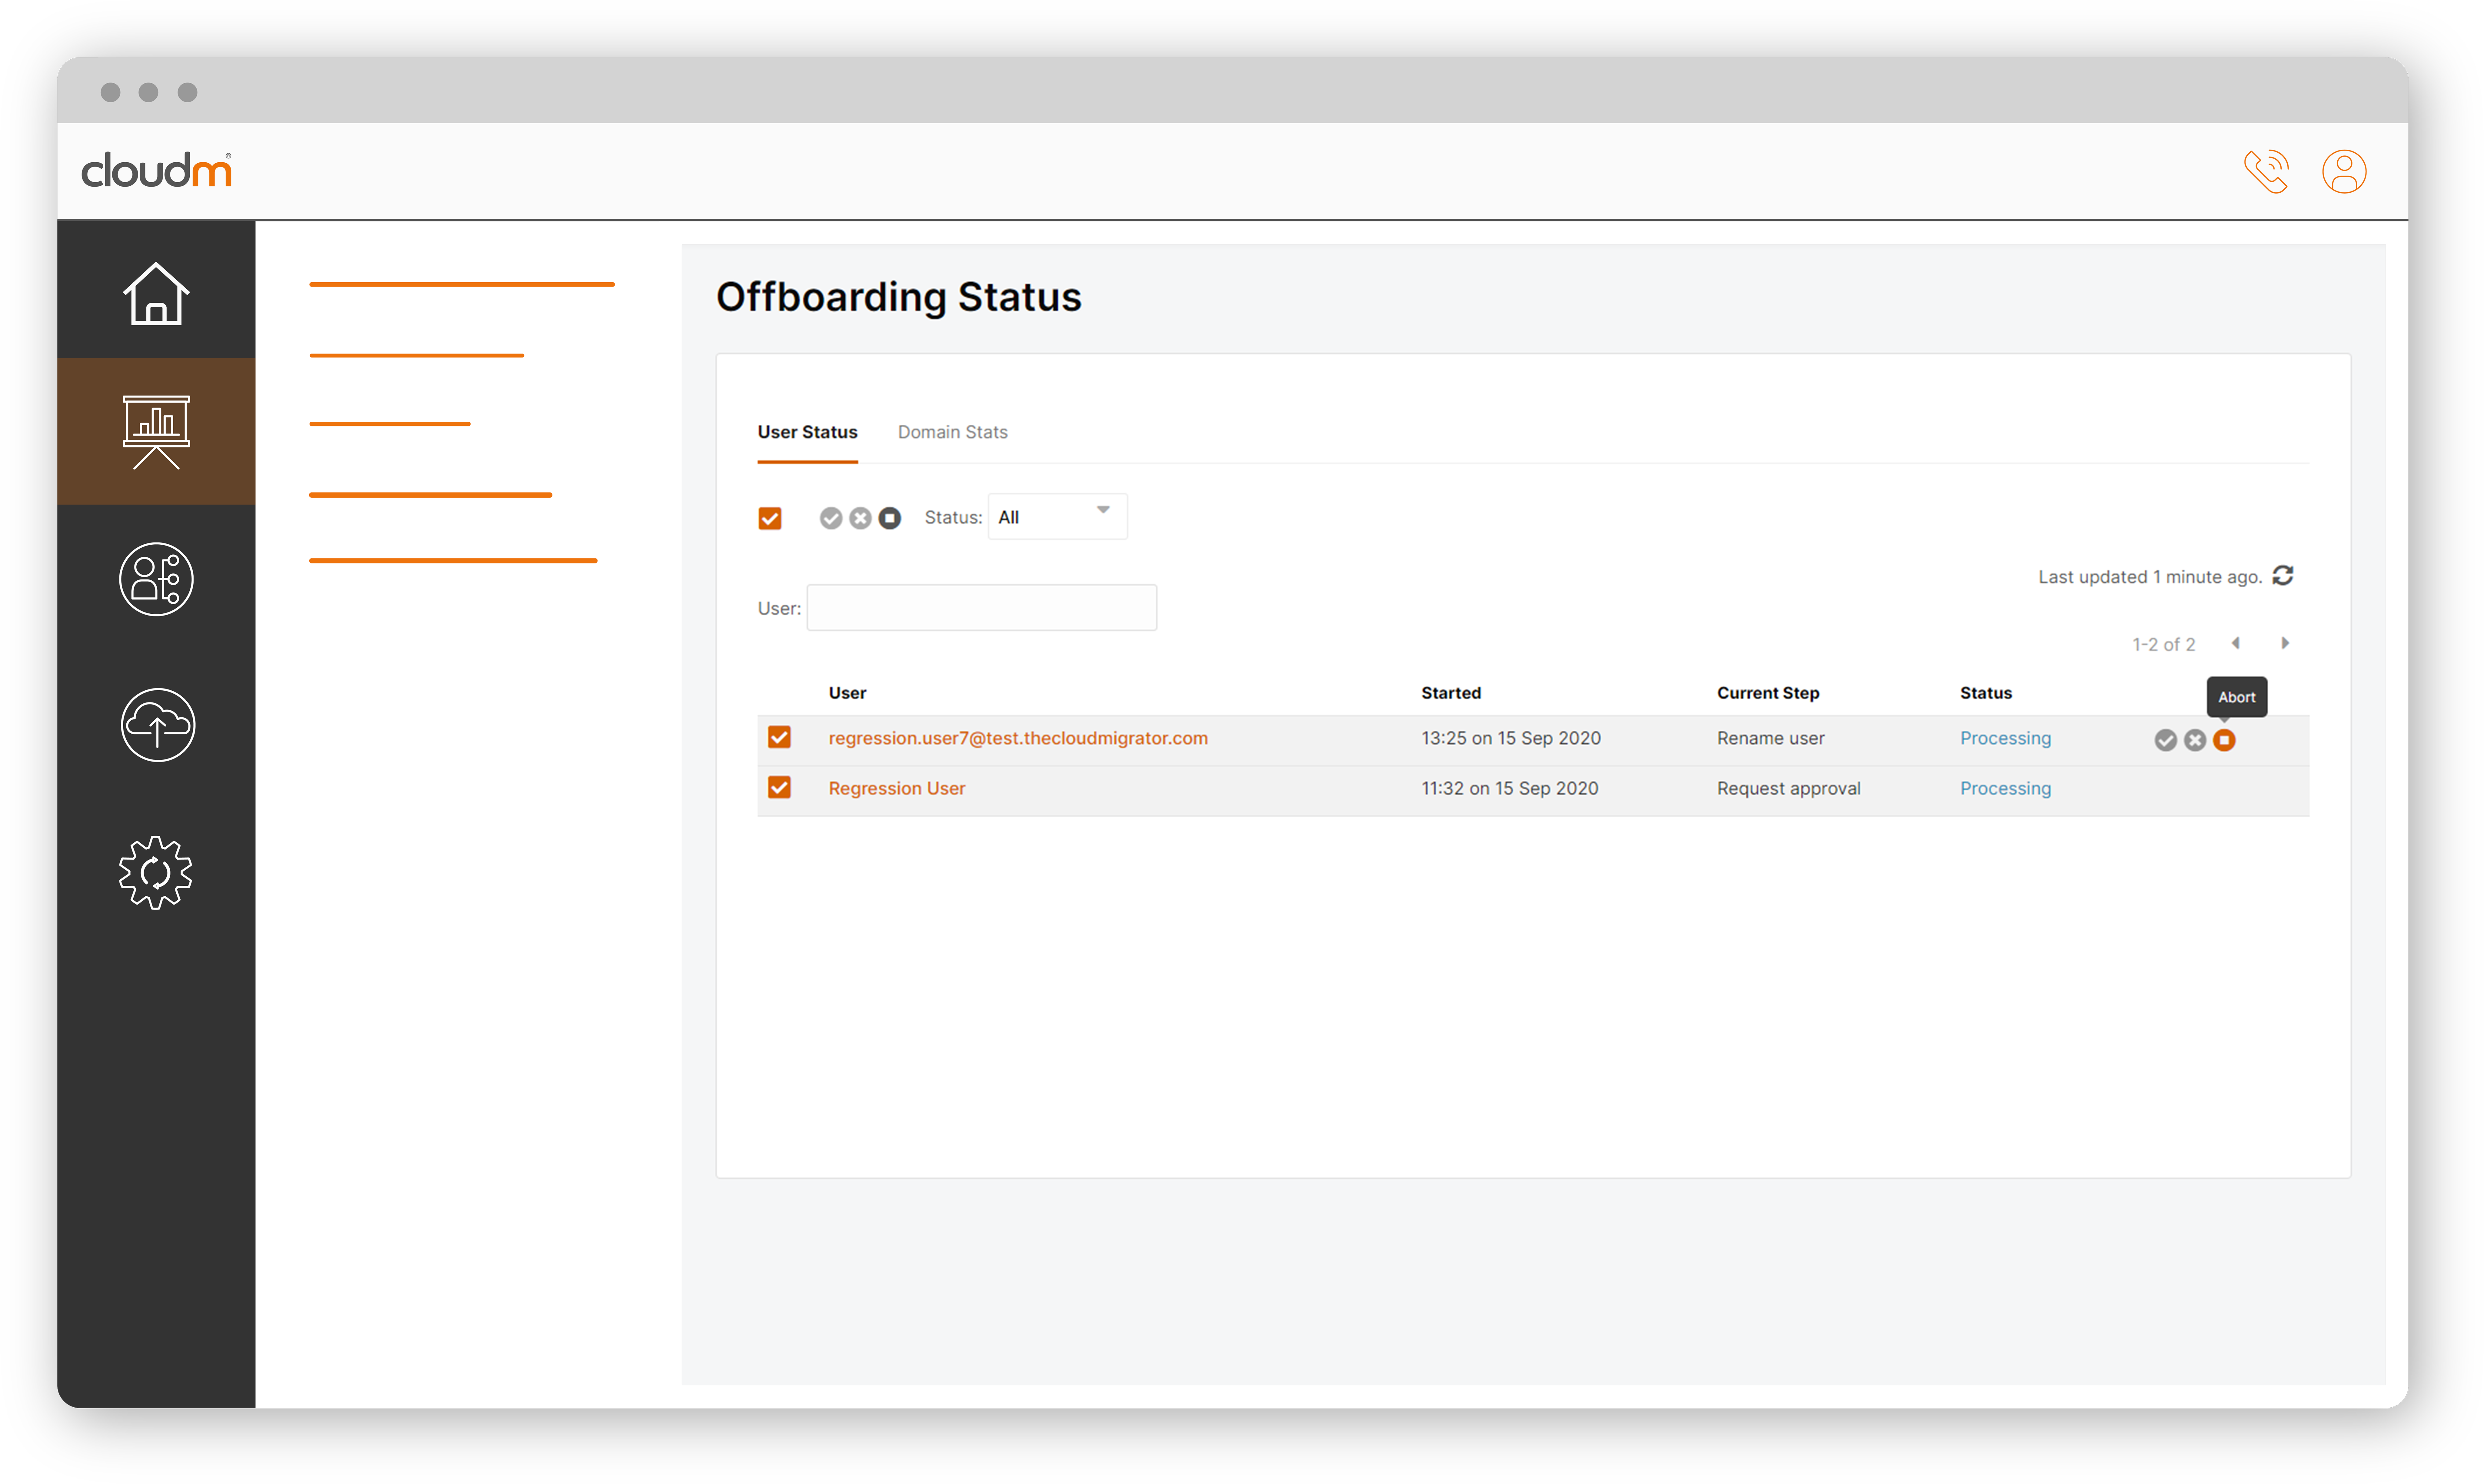 Offboarding status select all